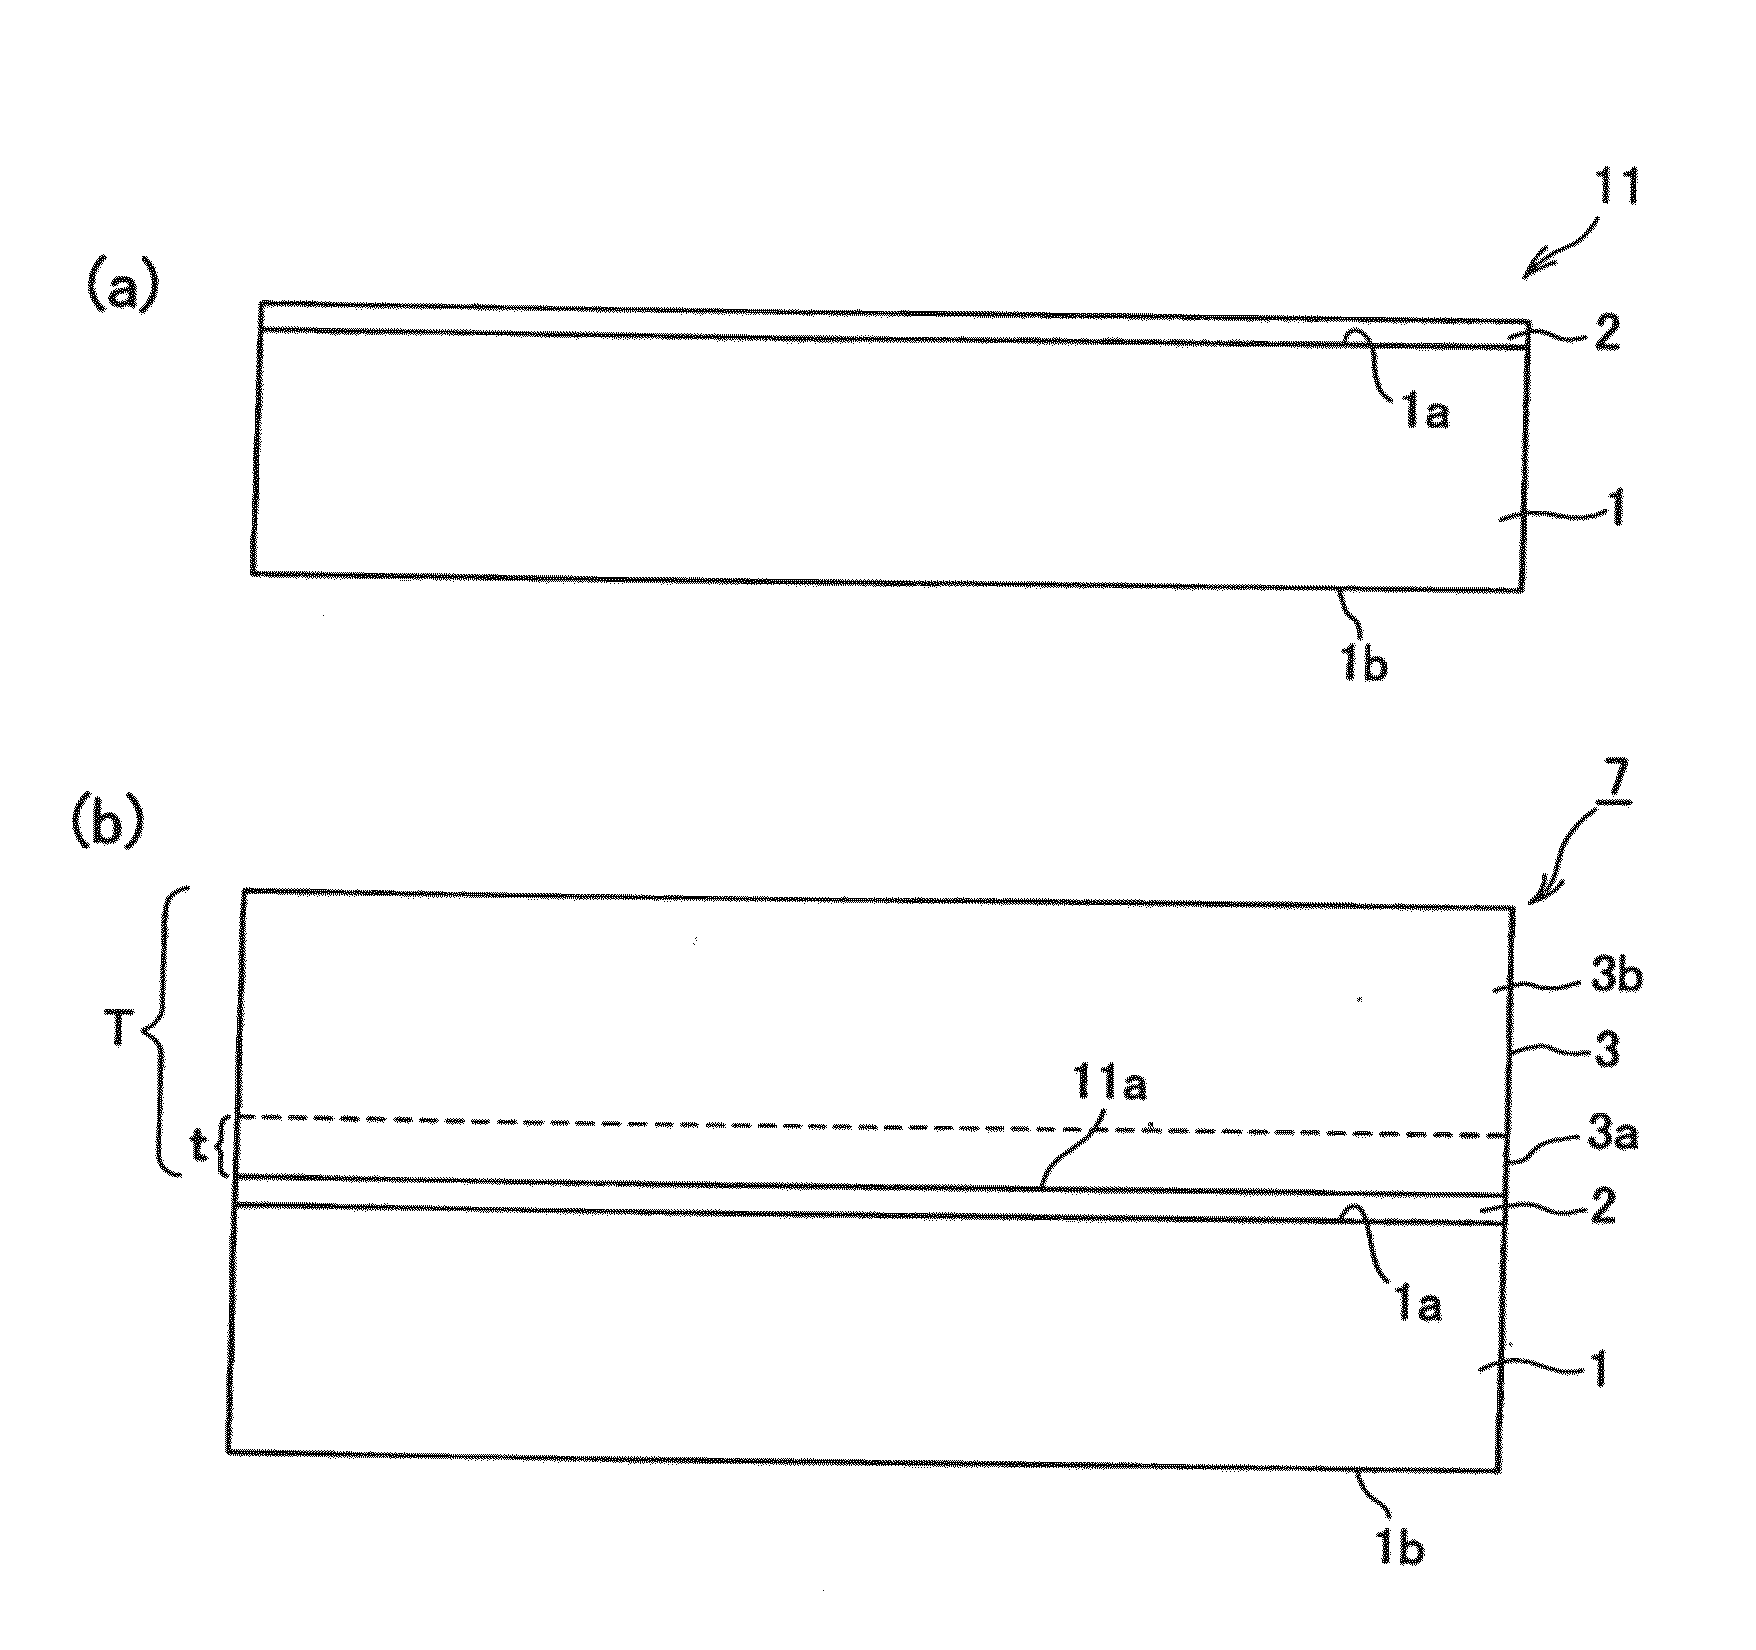 Semiconductor Light-Emitting Element and Laminate Containing Same